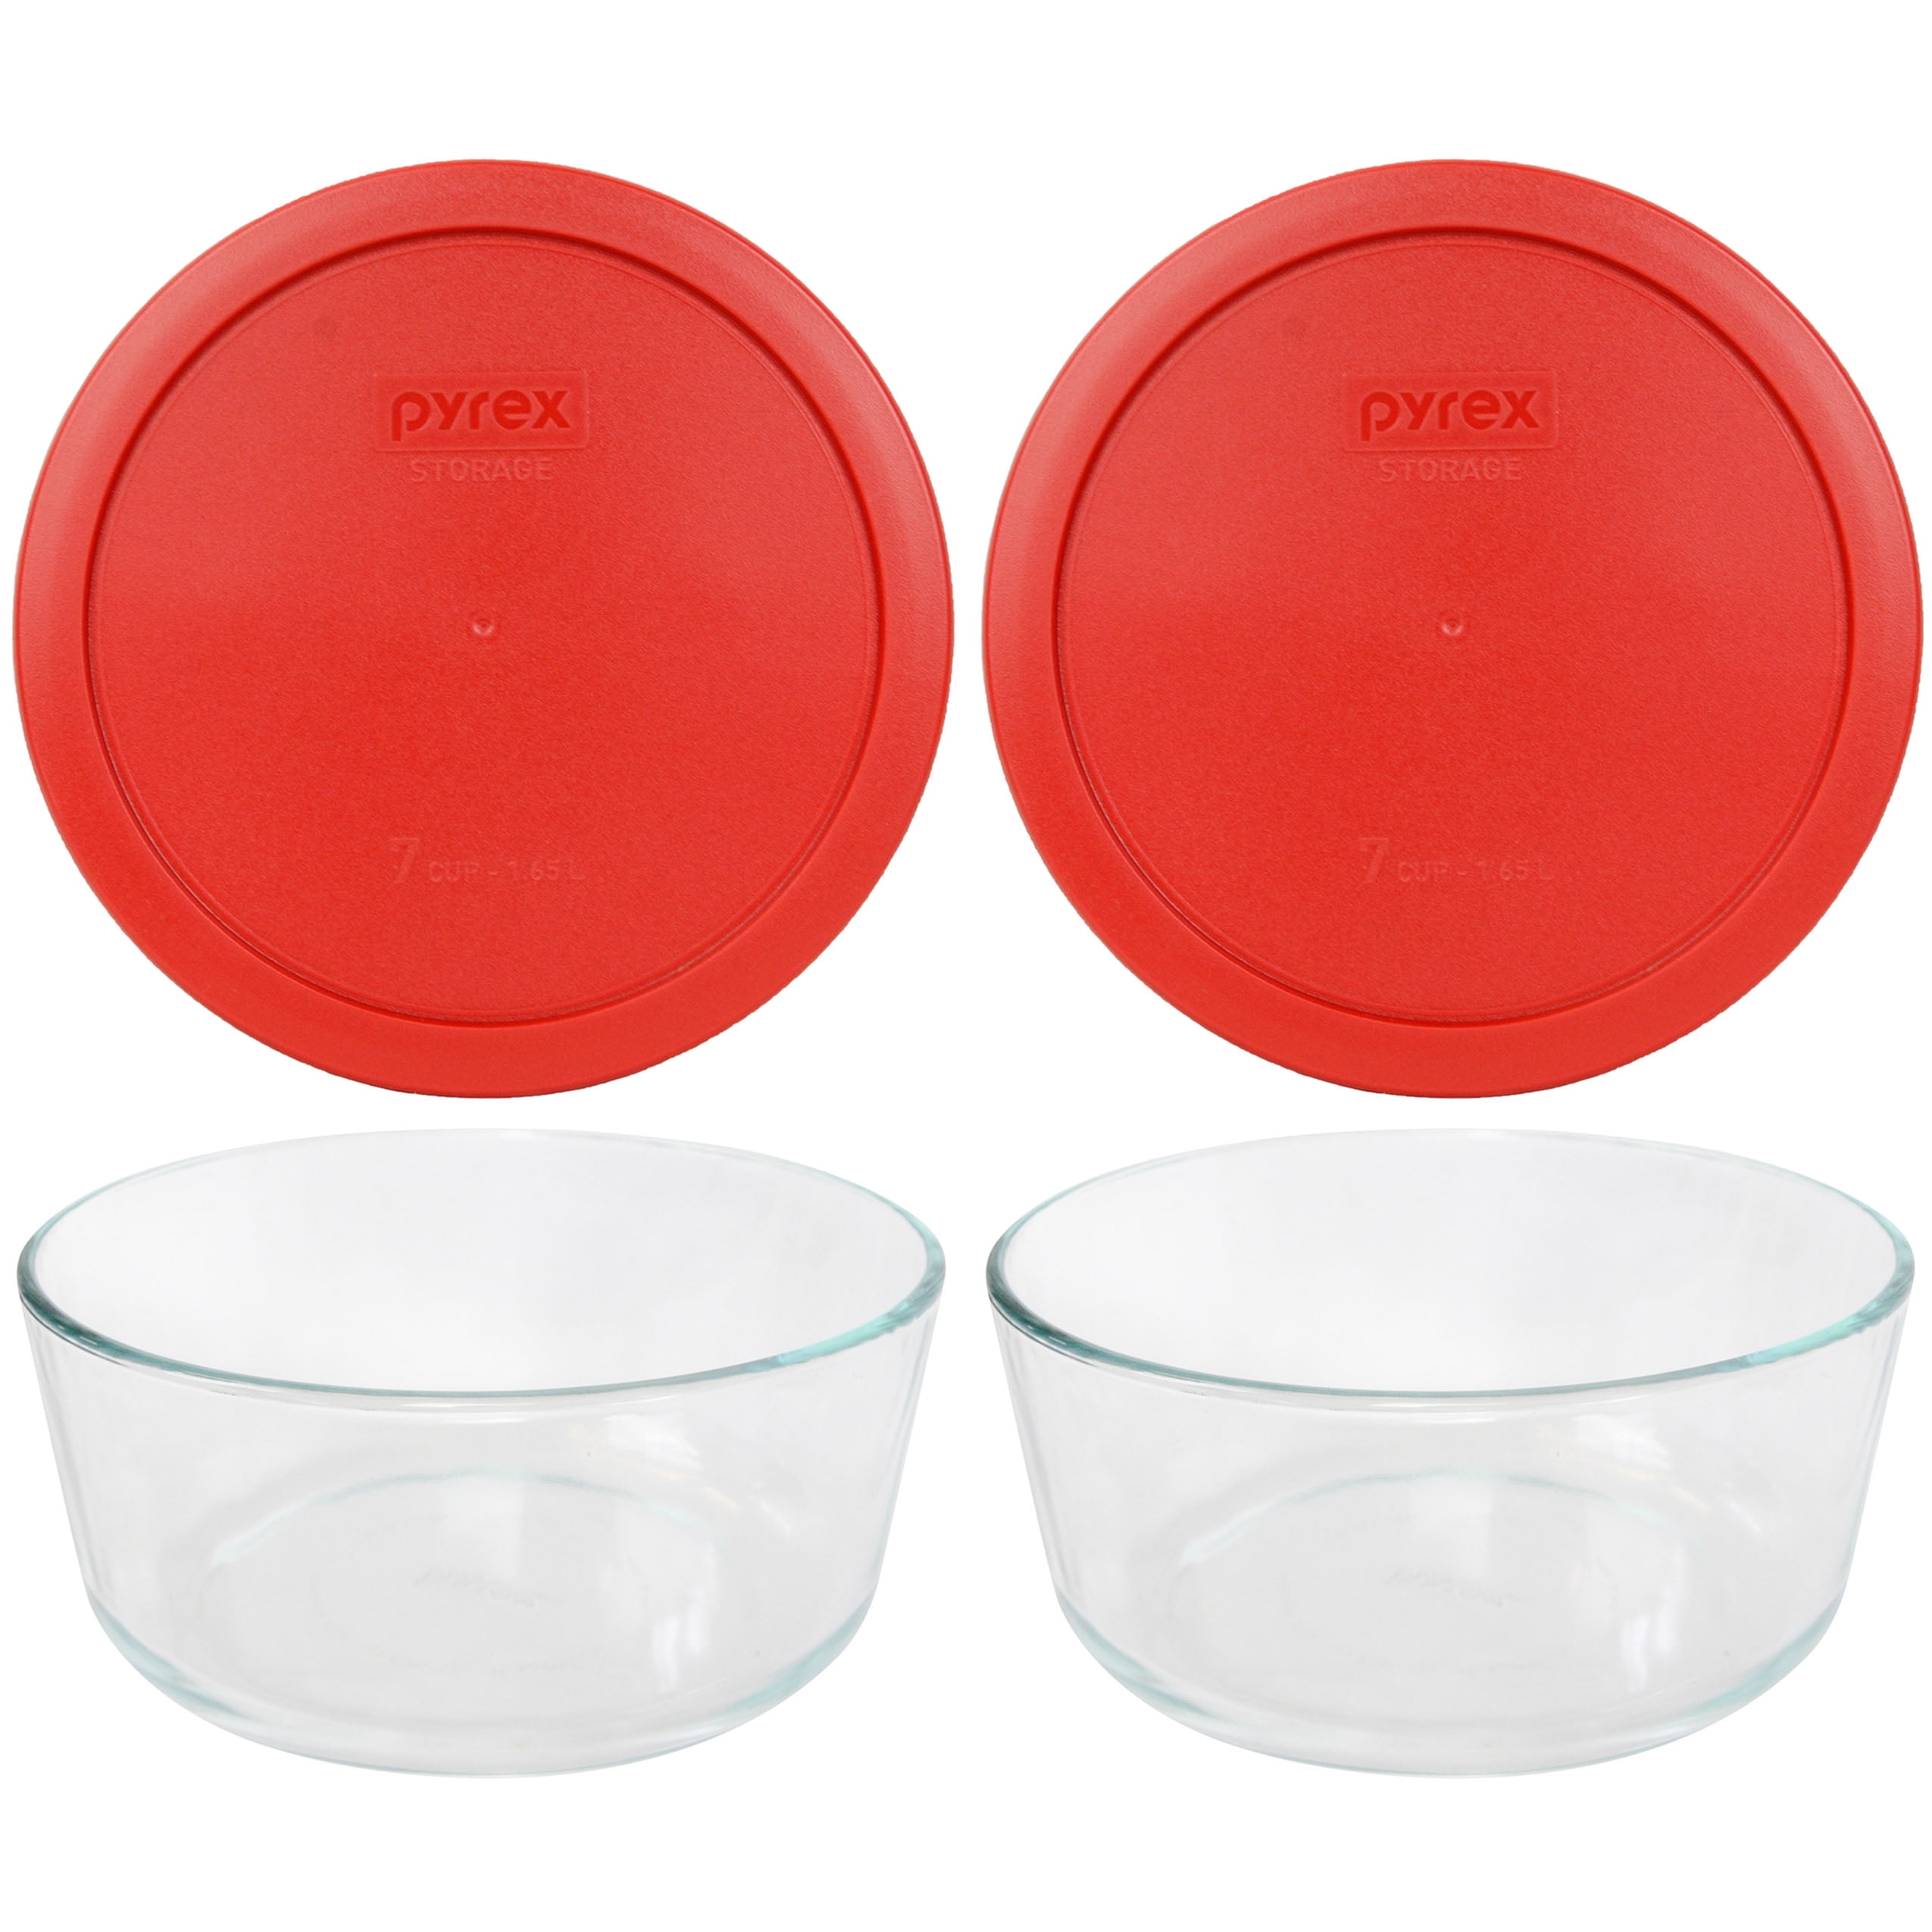 Pyrex (3) 7202 1-Cup Glass Bowls & Holiday Themed Red, White